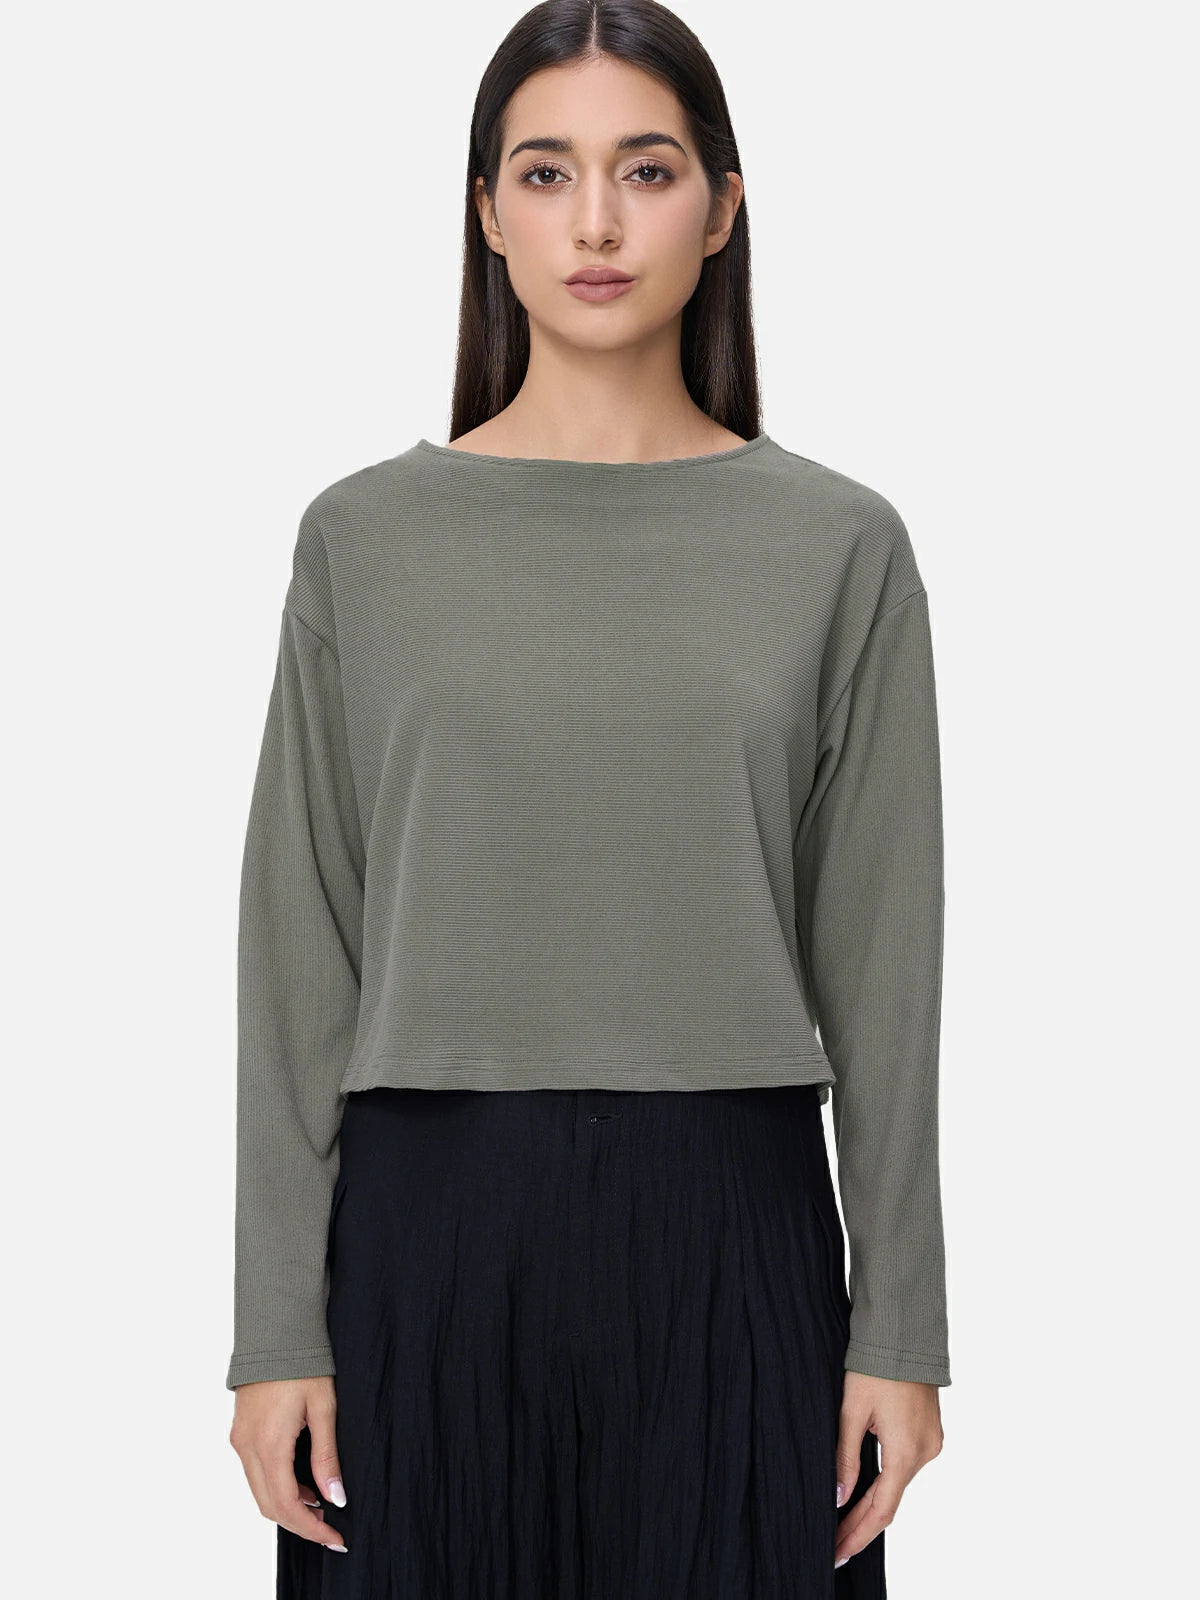 Stylish round neck T-shirt with a loose and comfortable fit